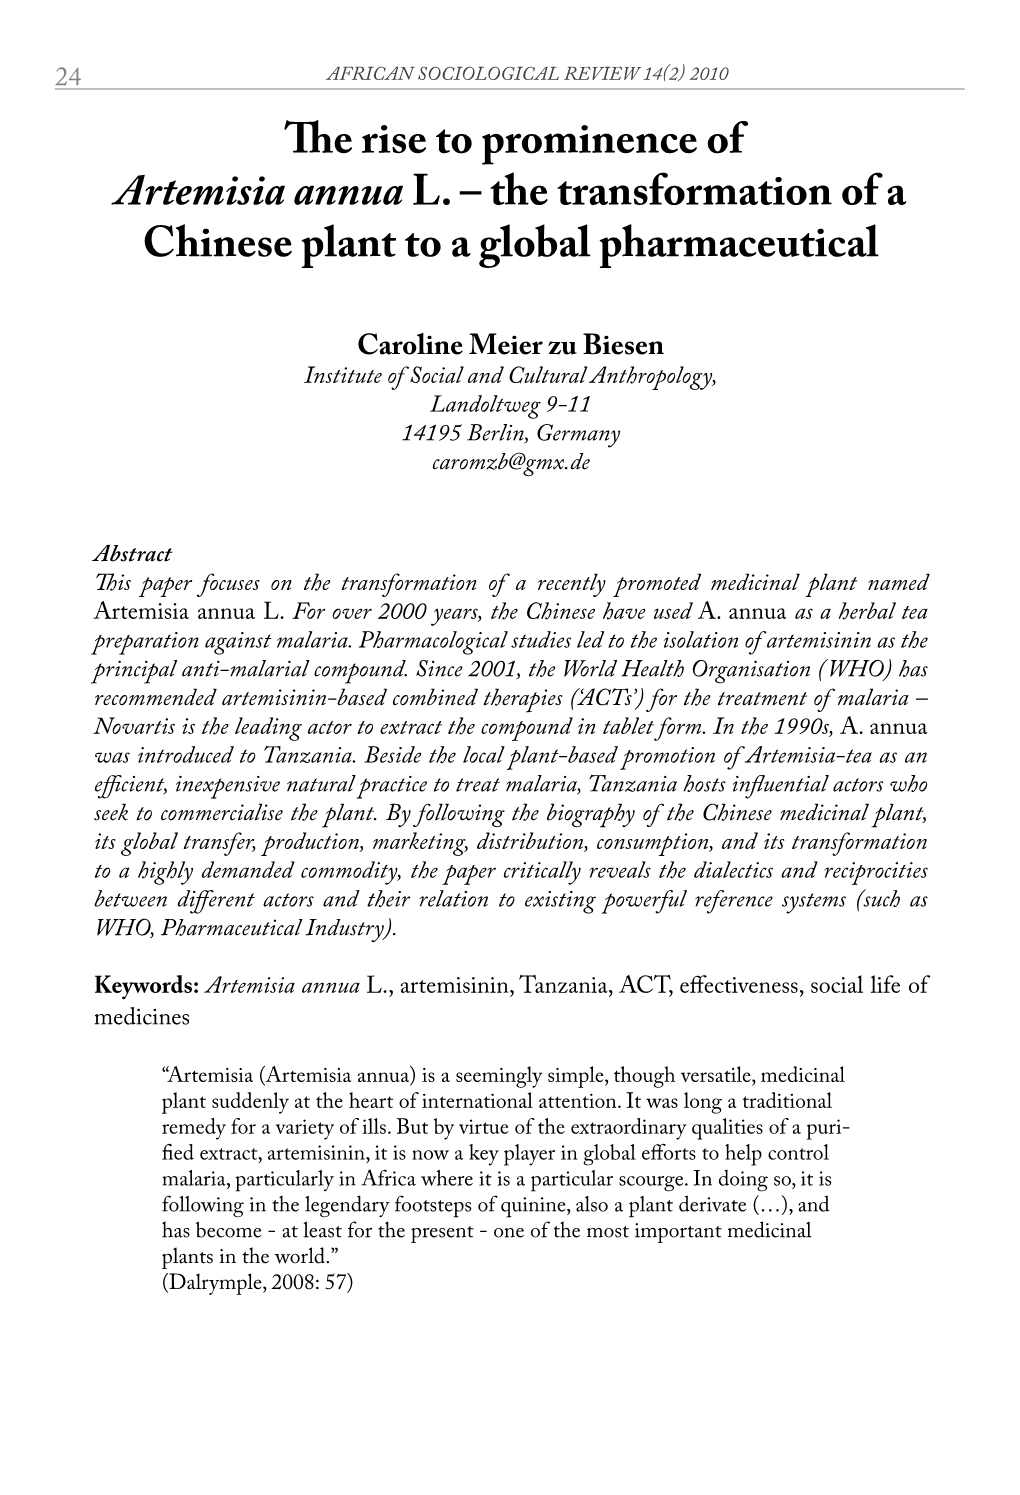 The Rise to Prominence of Artemisia Annua L. – the Transformation of a Chinese Plant to a Global Pharmaceutical